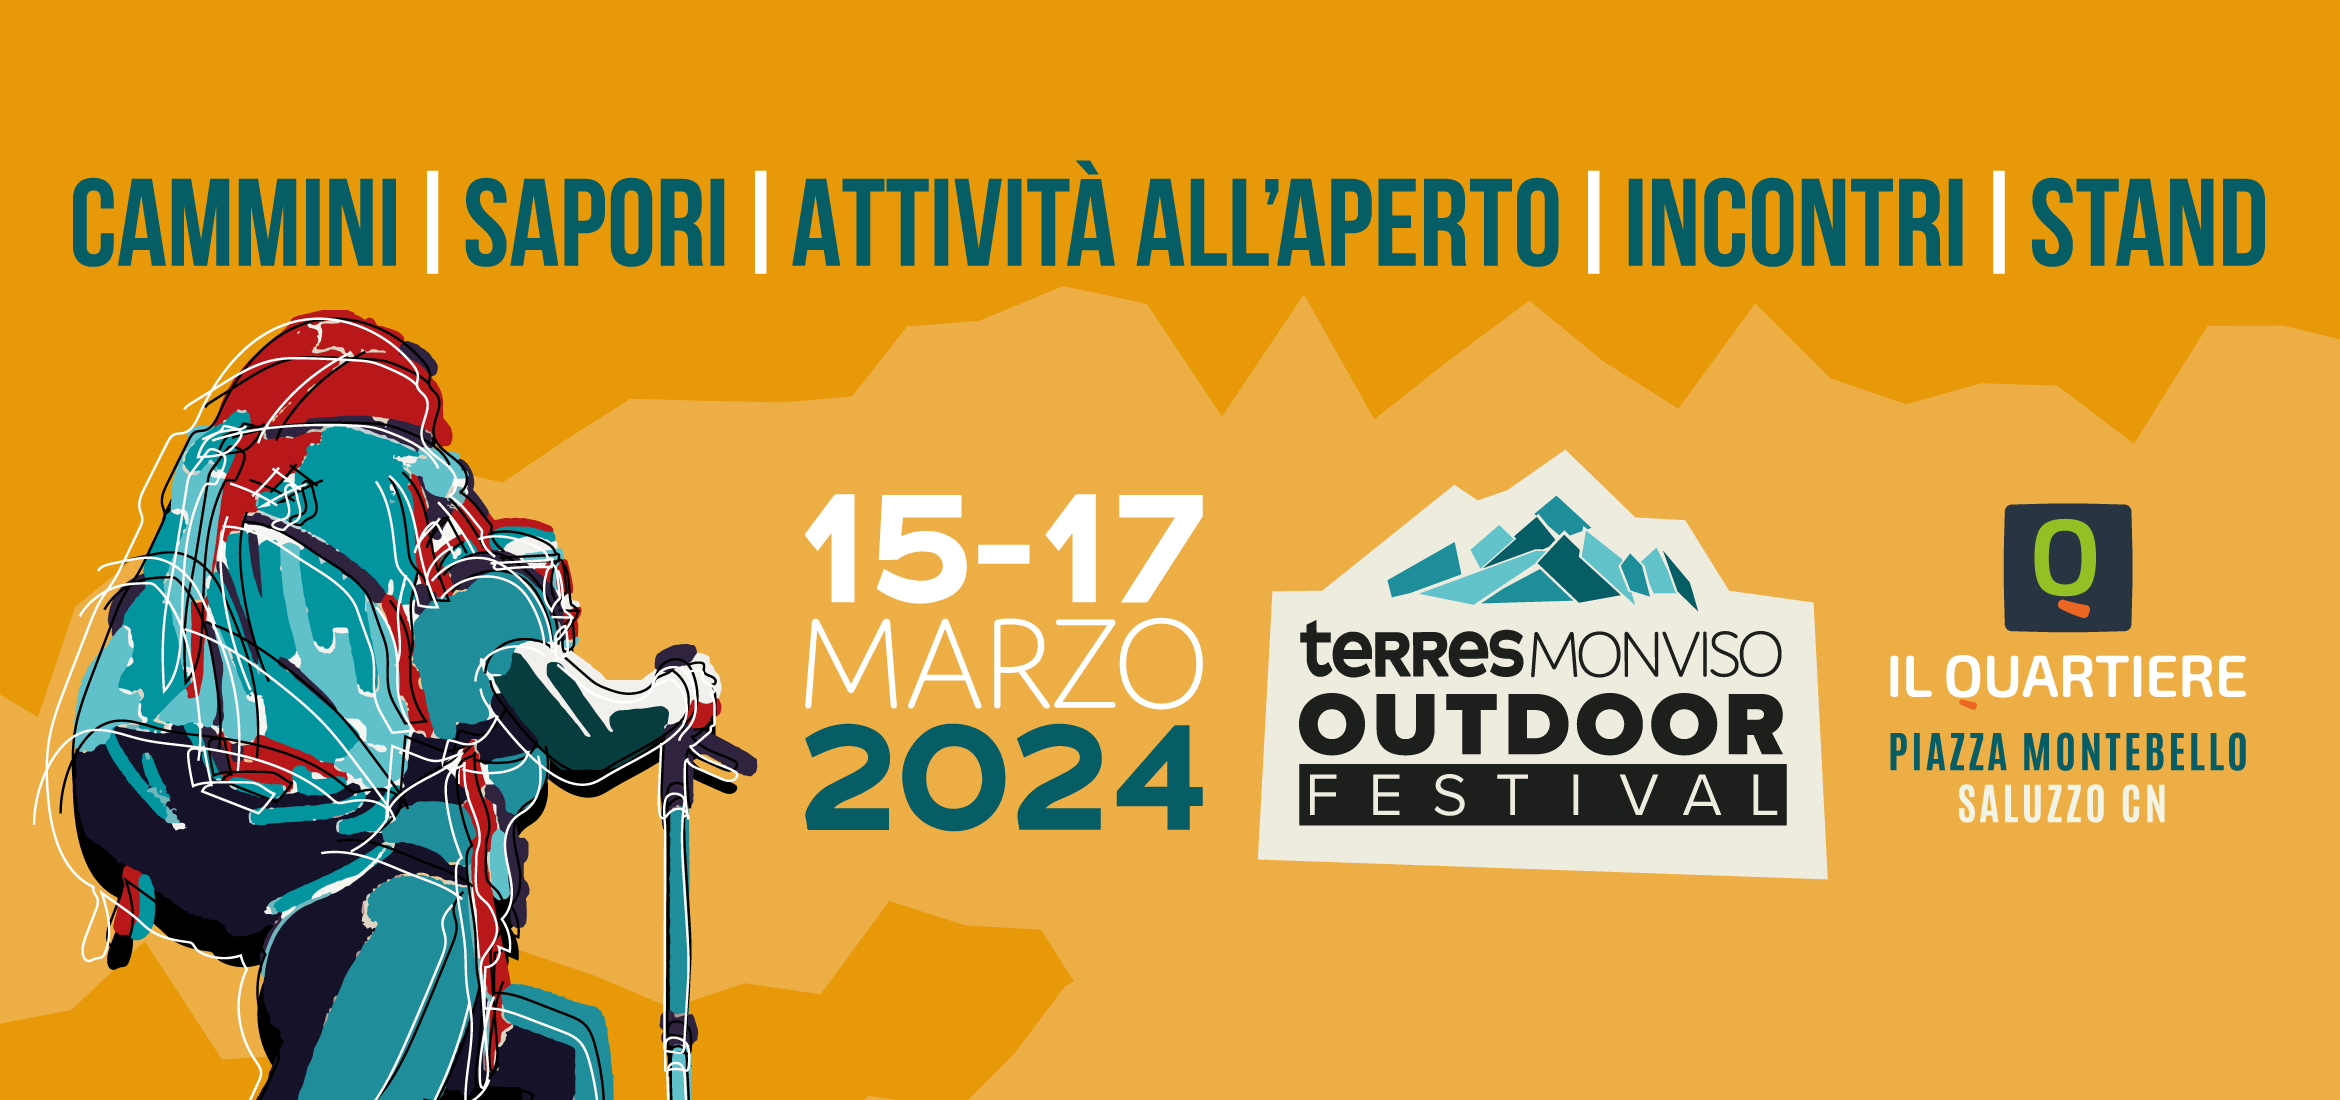 Cliff at the Heart of Adventure: Terres Monviso Outdoor Fest 2024 